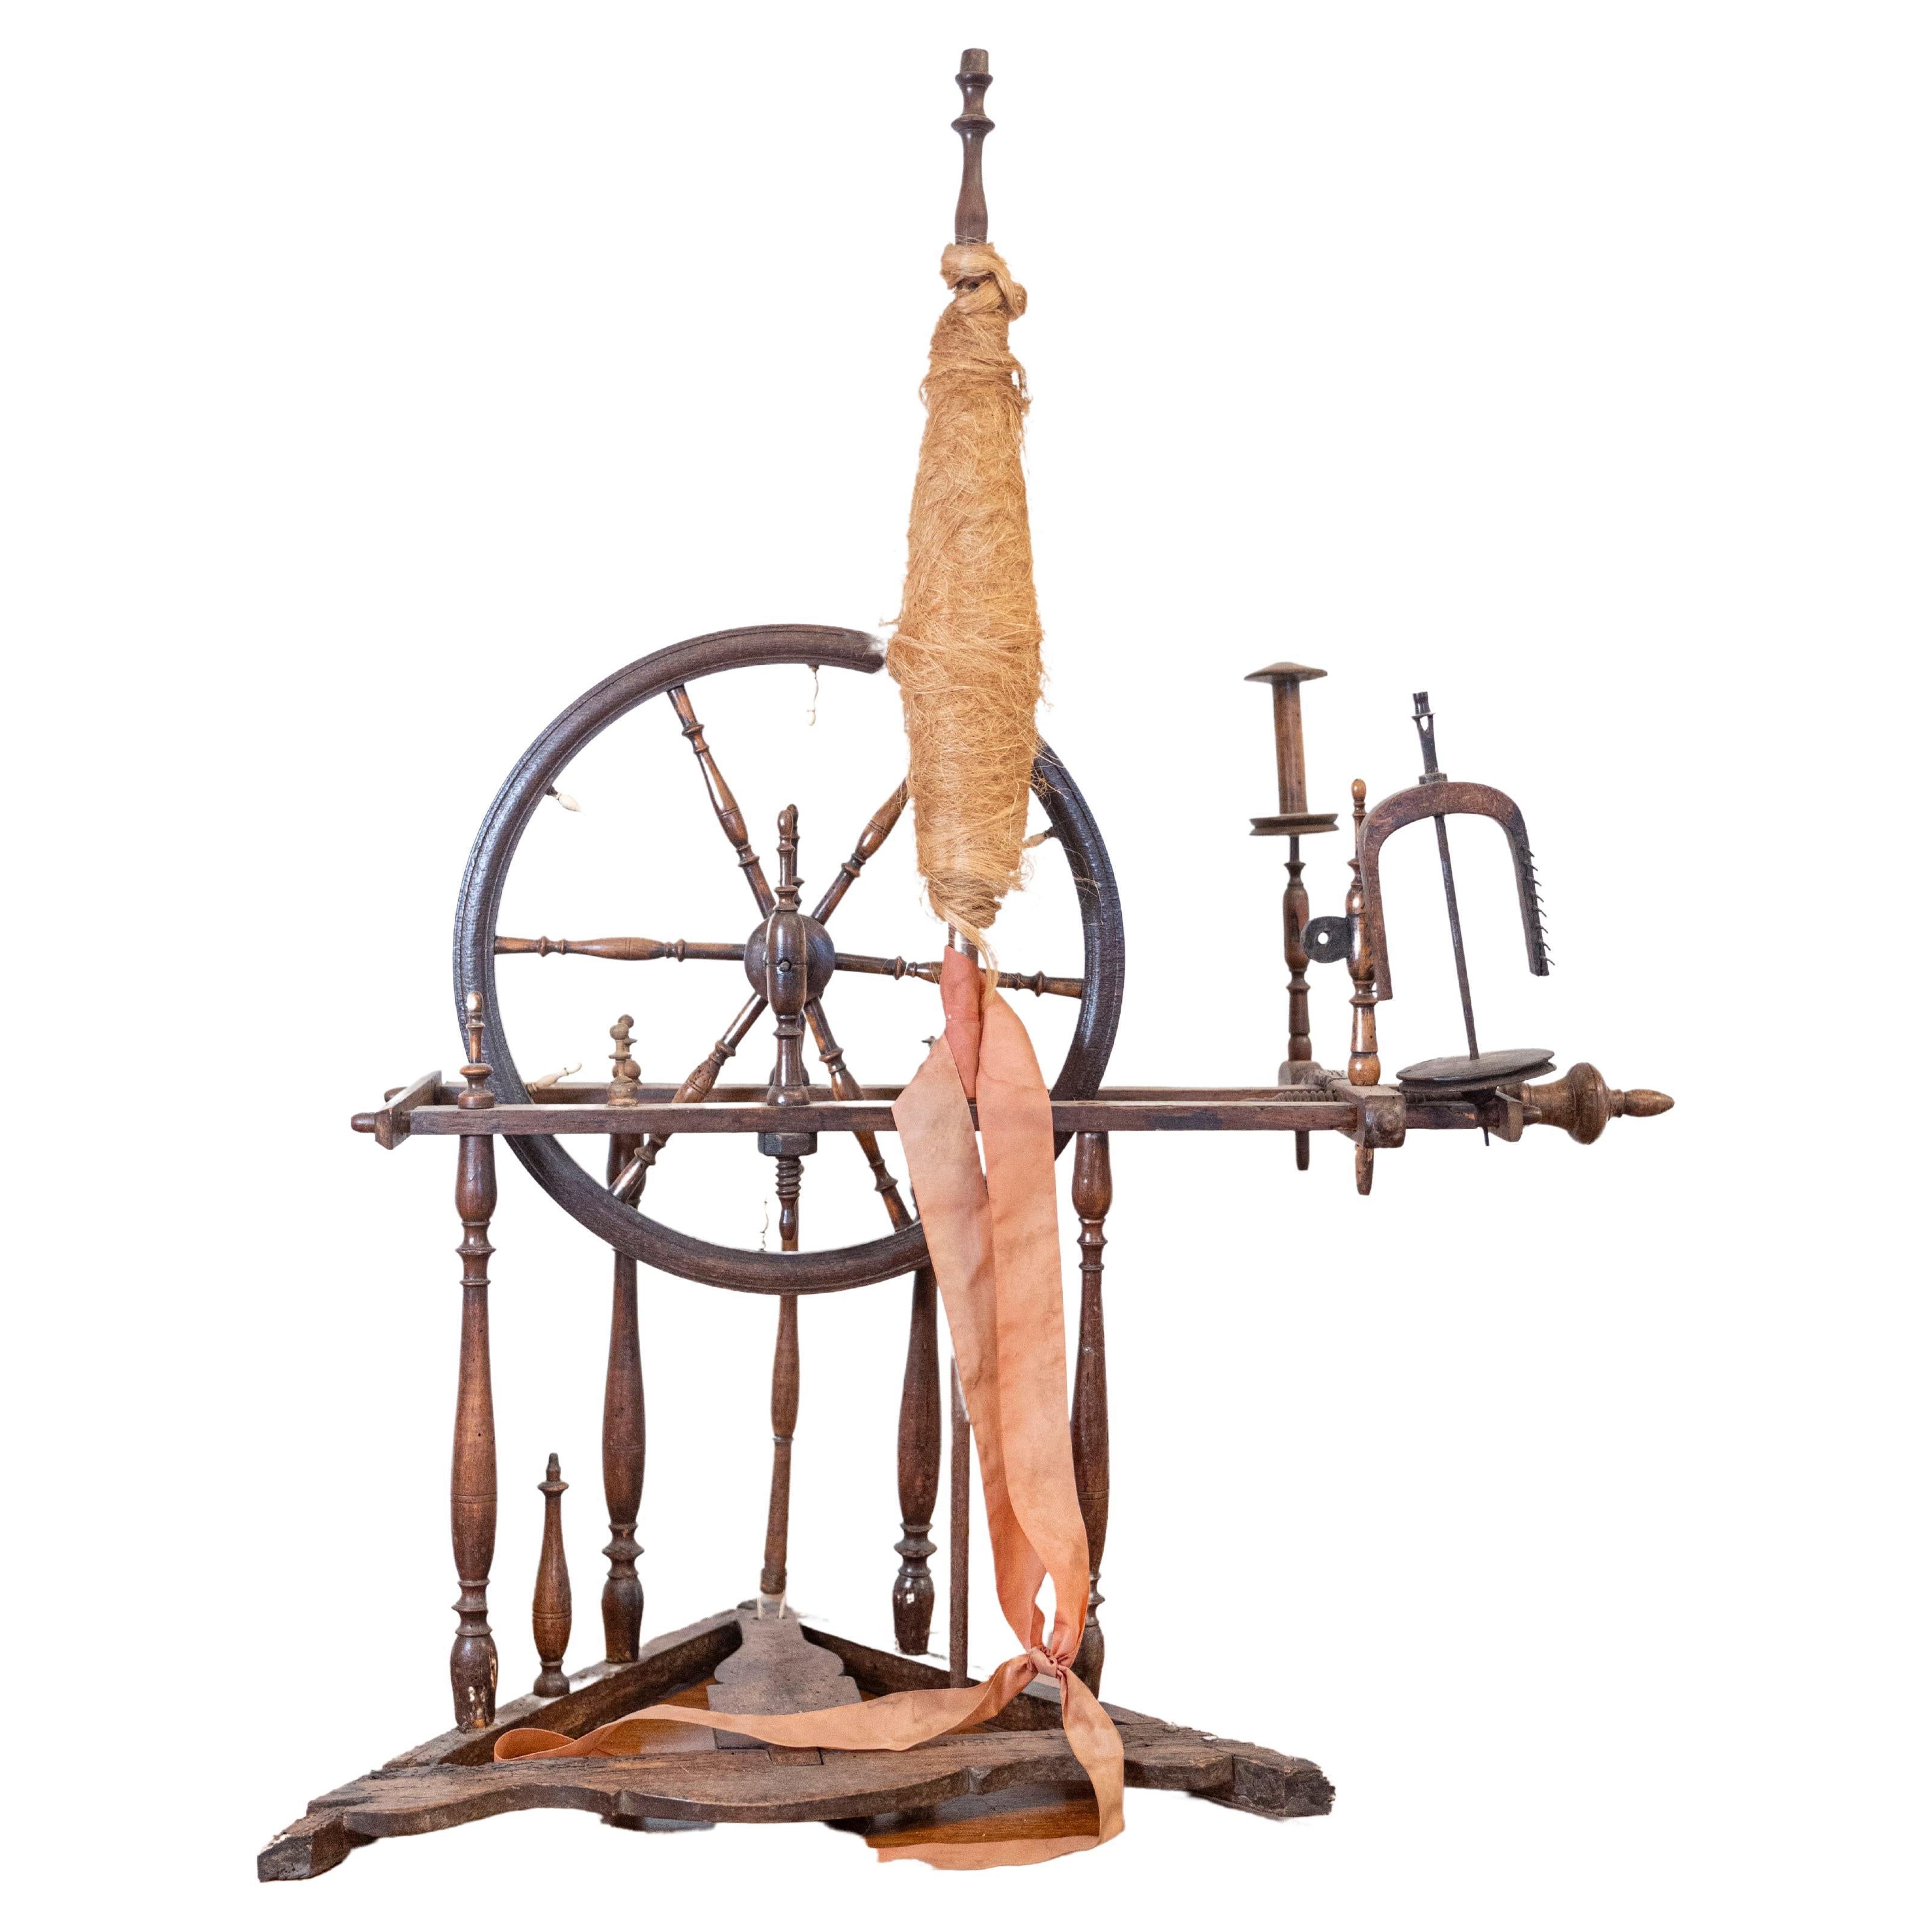 Rustic French Spinning Wheel with Original Parts from the 18th Century For Sale